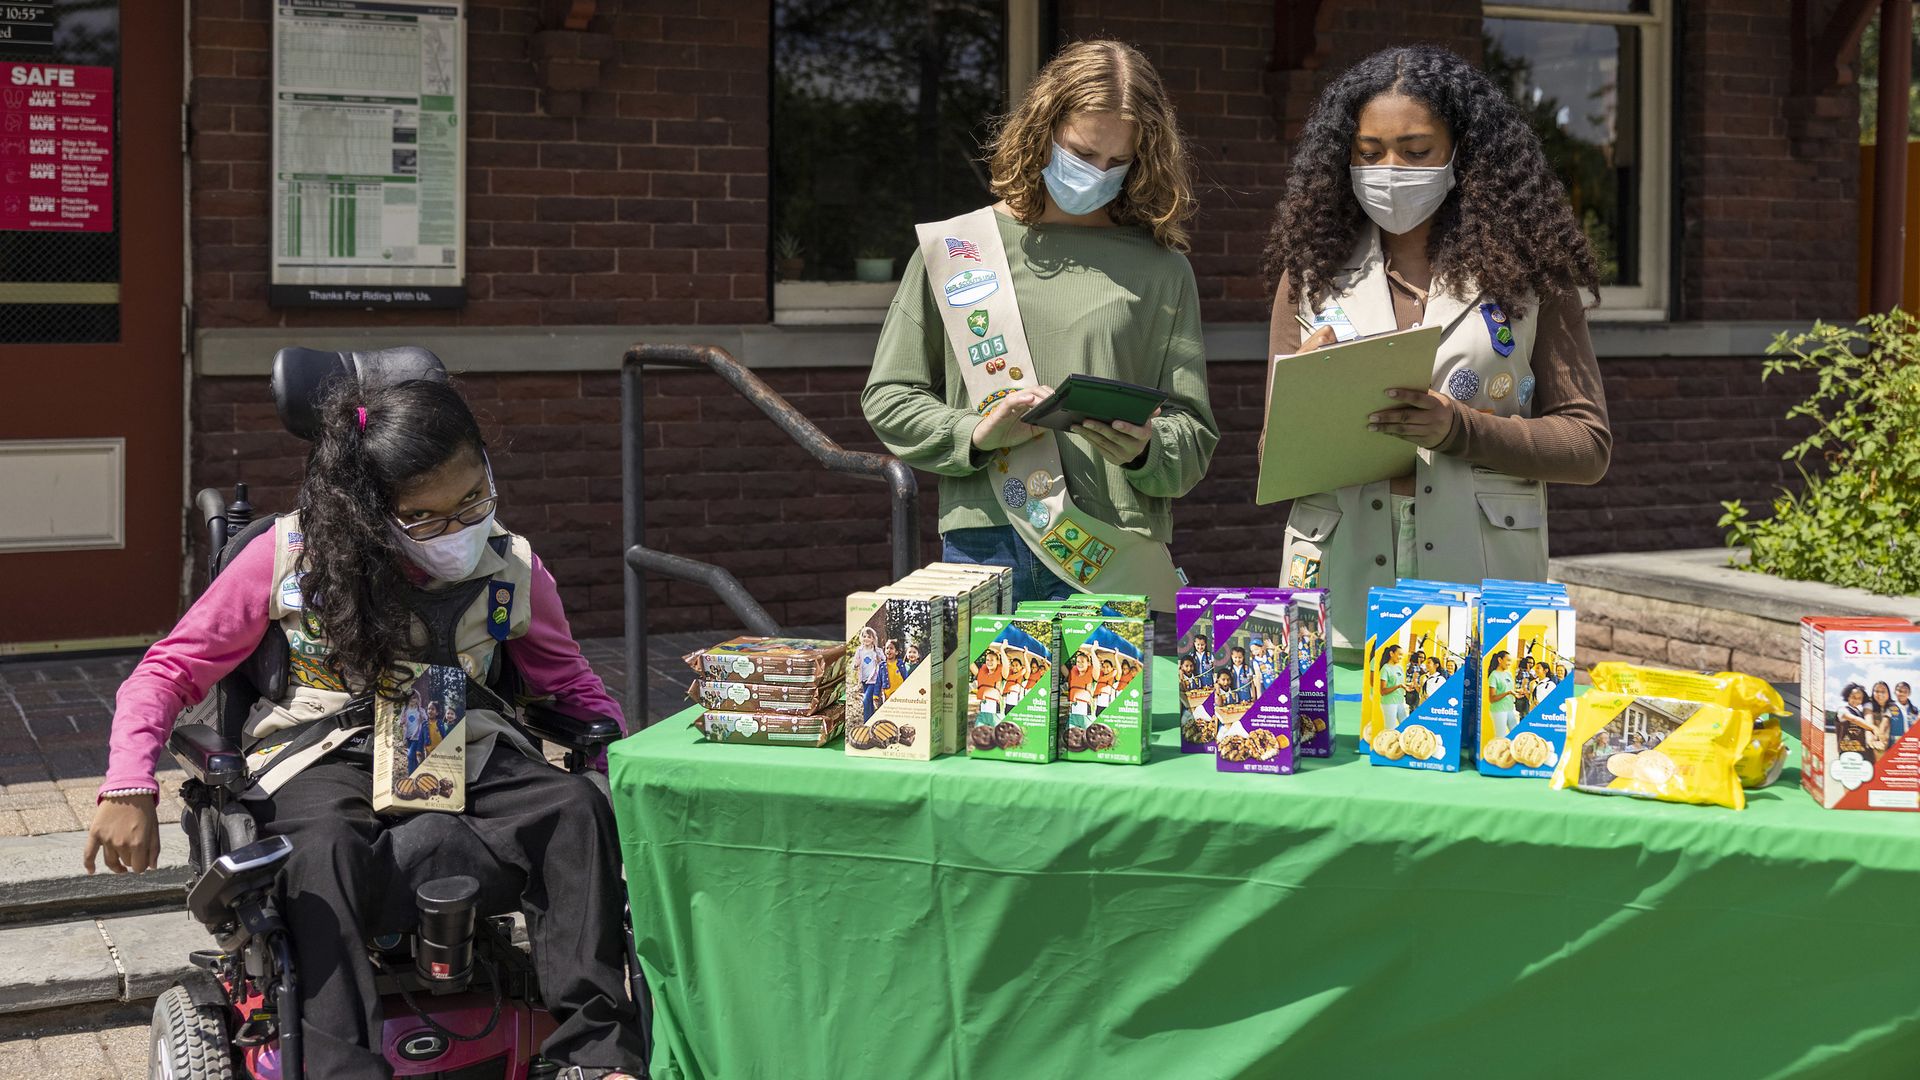 Two girls in beige vests and one in a wheelchair sell Girl Scout Cookies at a green-clothed table outdoors.